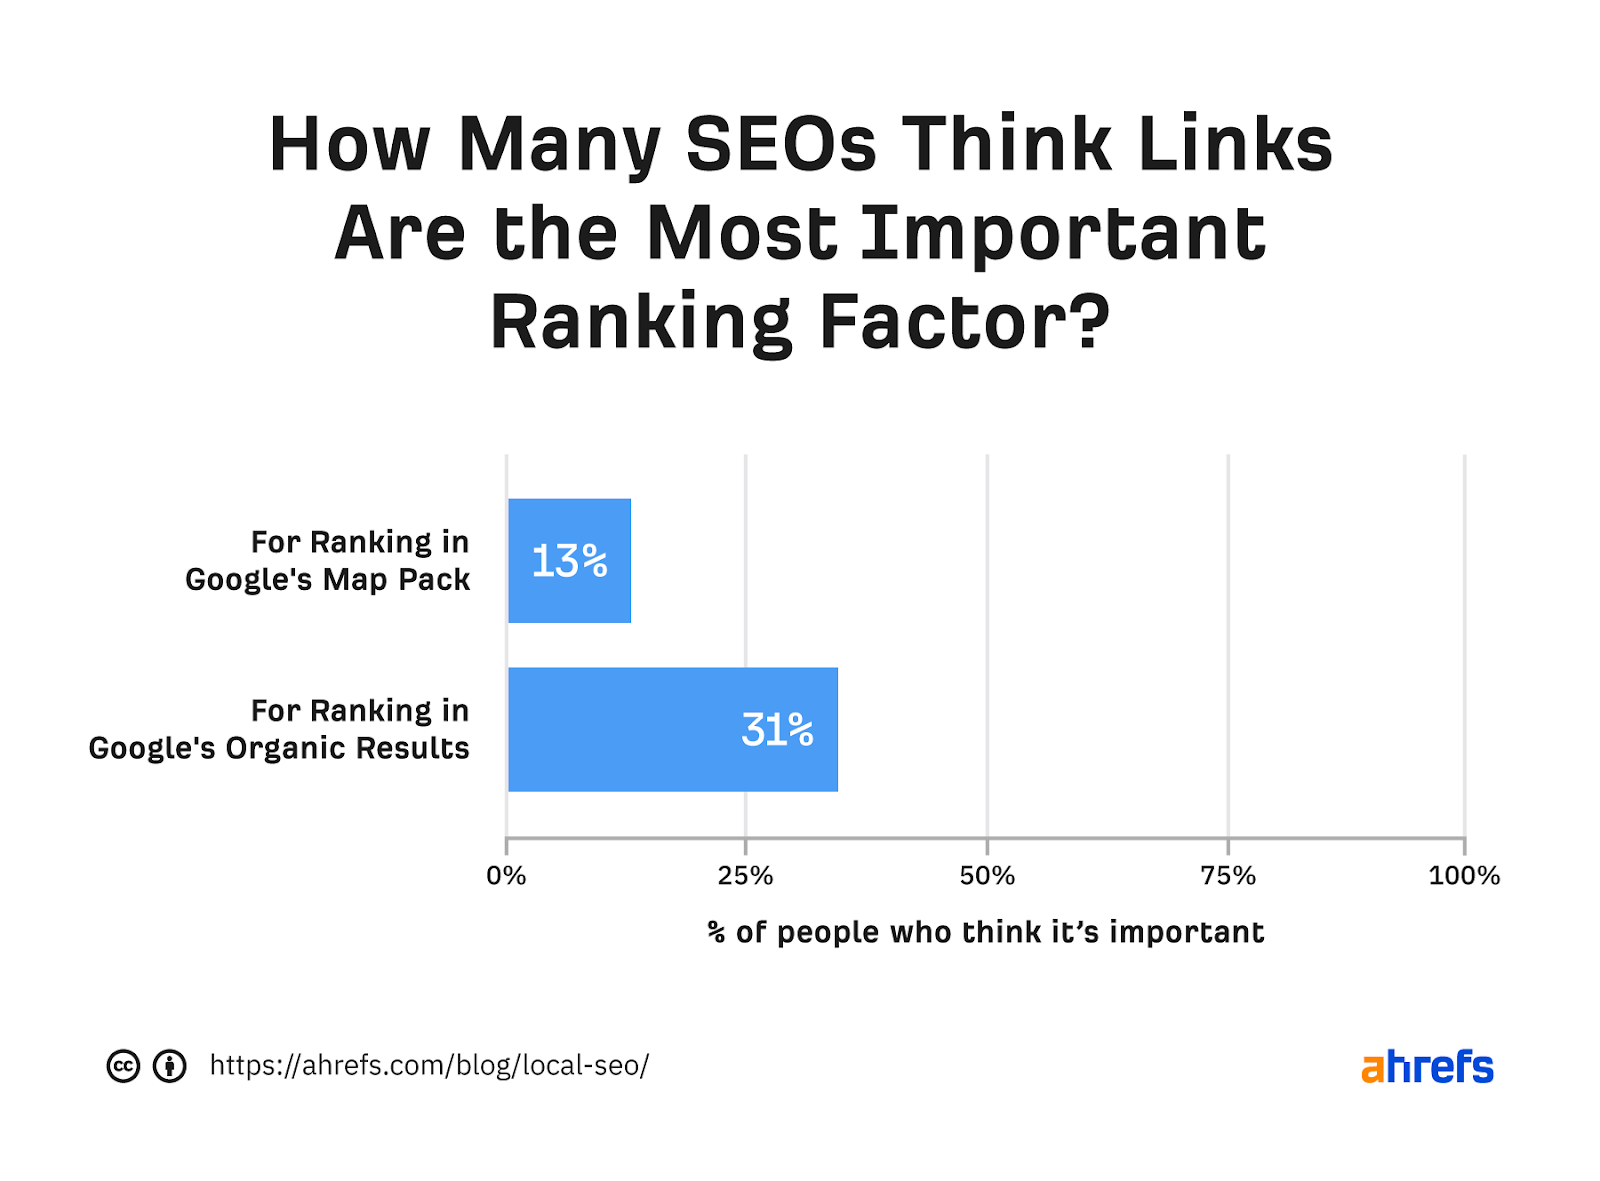 Bar graph showing percentage of SEOs who think links are most important ranking factor for "map pack" and "regular" results, respectively 